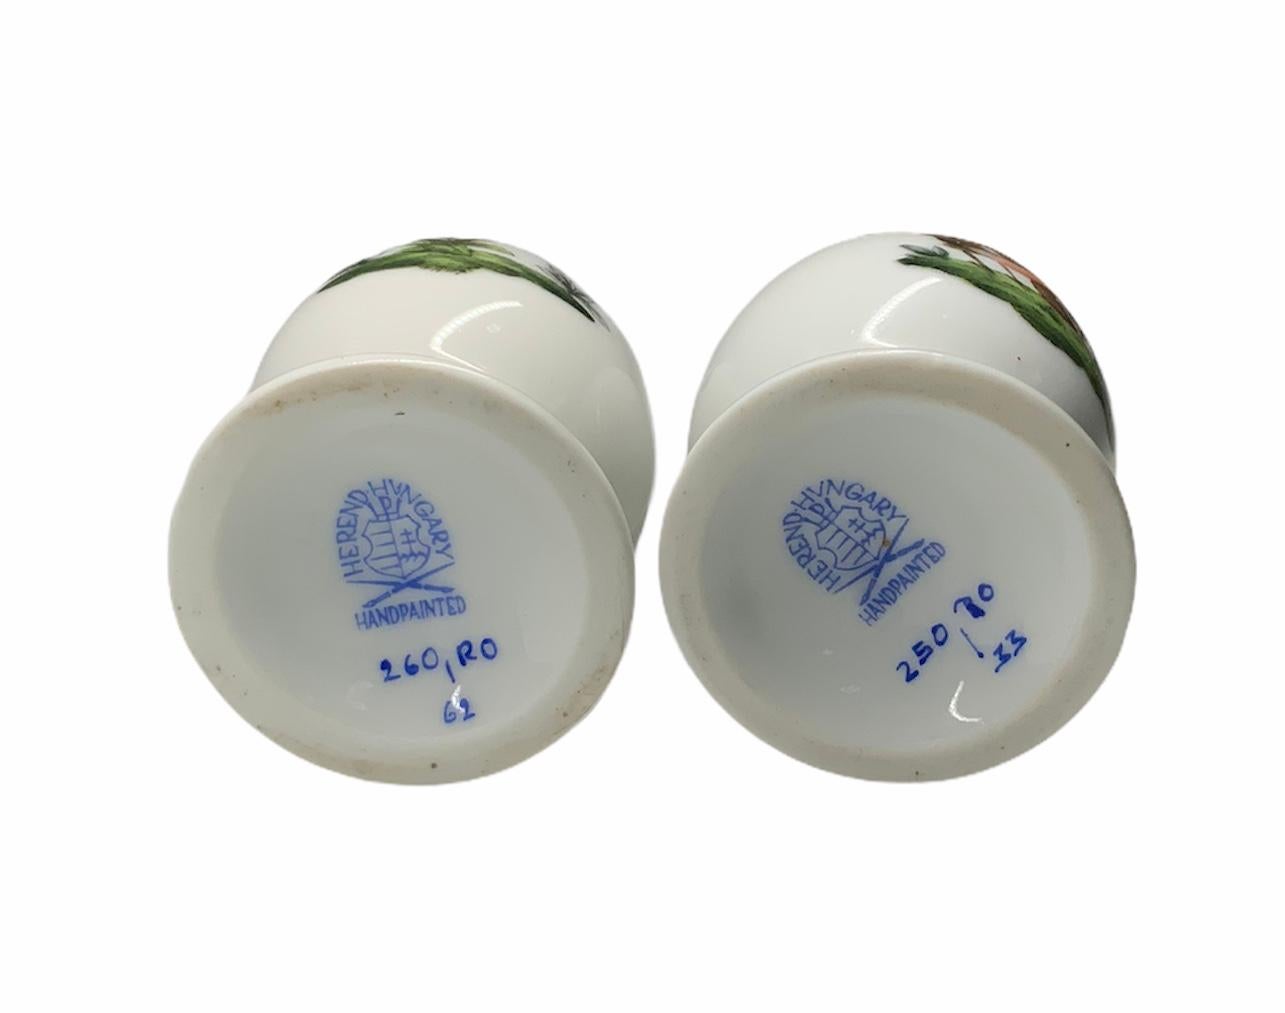 This is a Herend Rothschild pattern Hand Painted Porcelain of a pair of salt and pepper shakers. They are egg shaped with round pedestals attached to it that serve as stoppers. Their painting depict a scene with what appears to be a pair of warbler